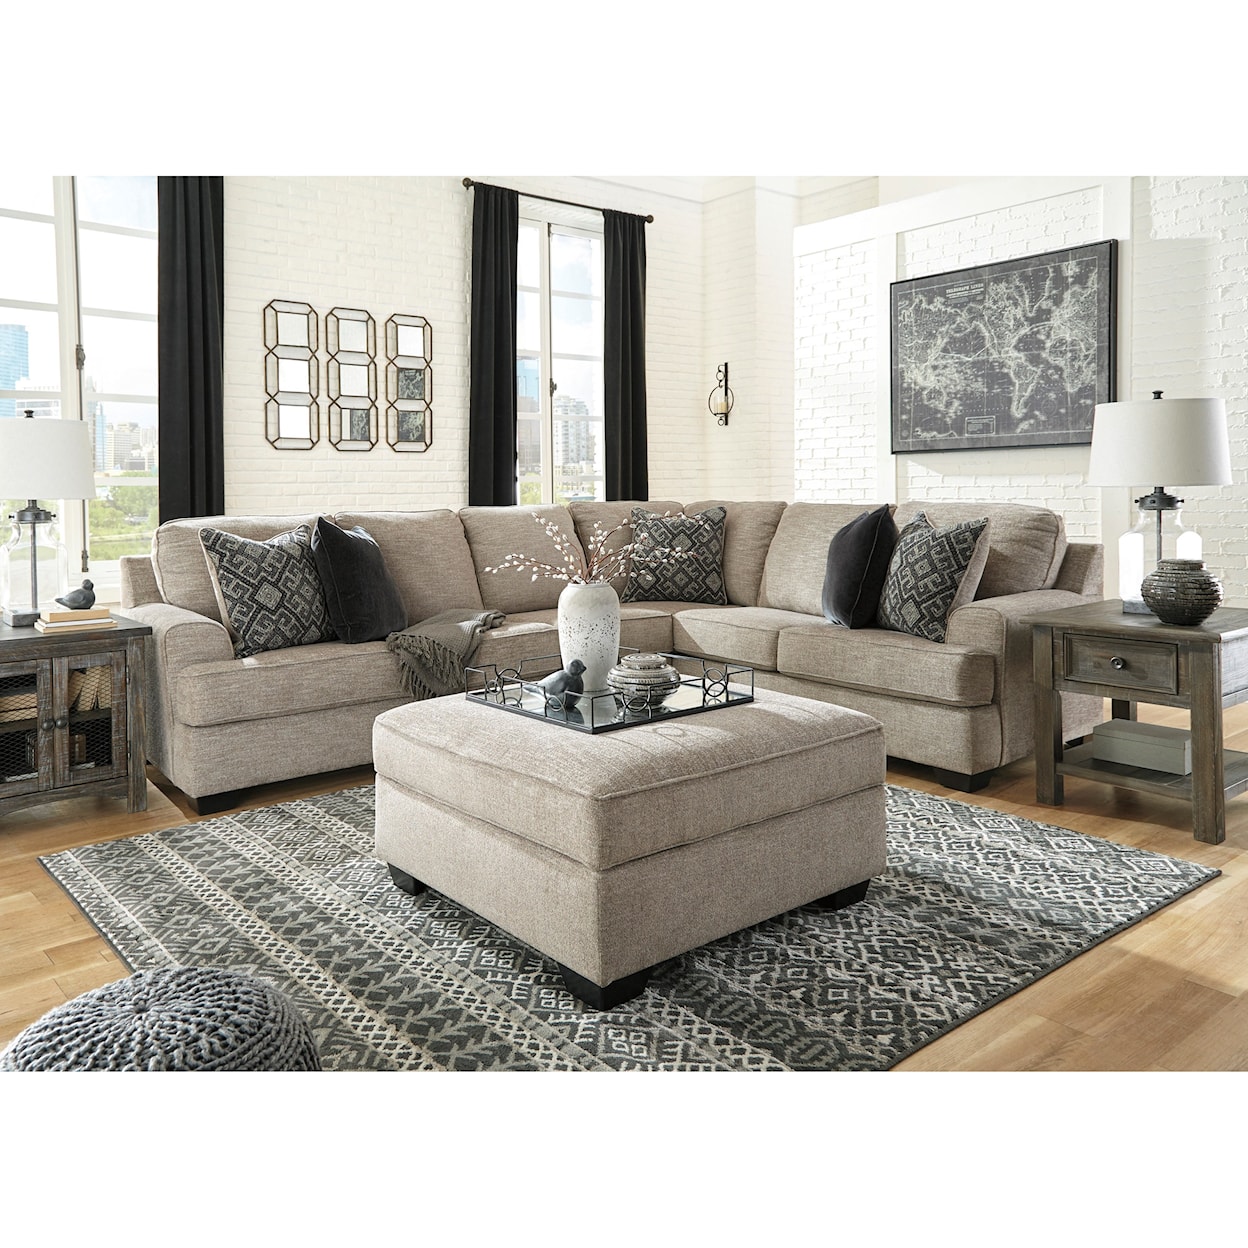 Benchcraft Bovarian 3-Piece Sectional